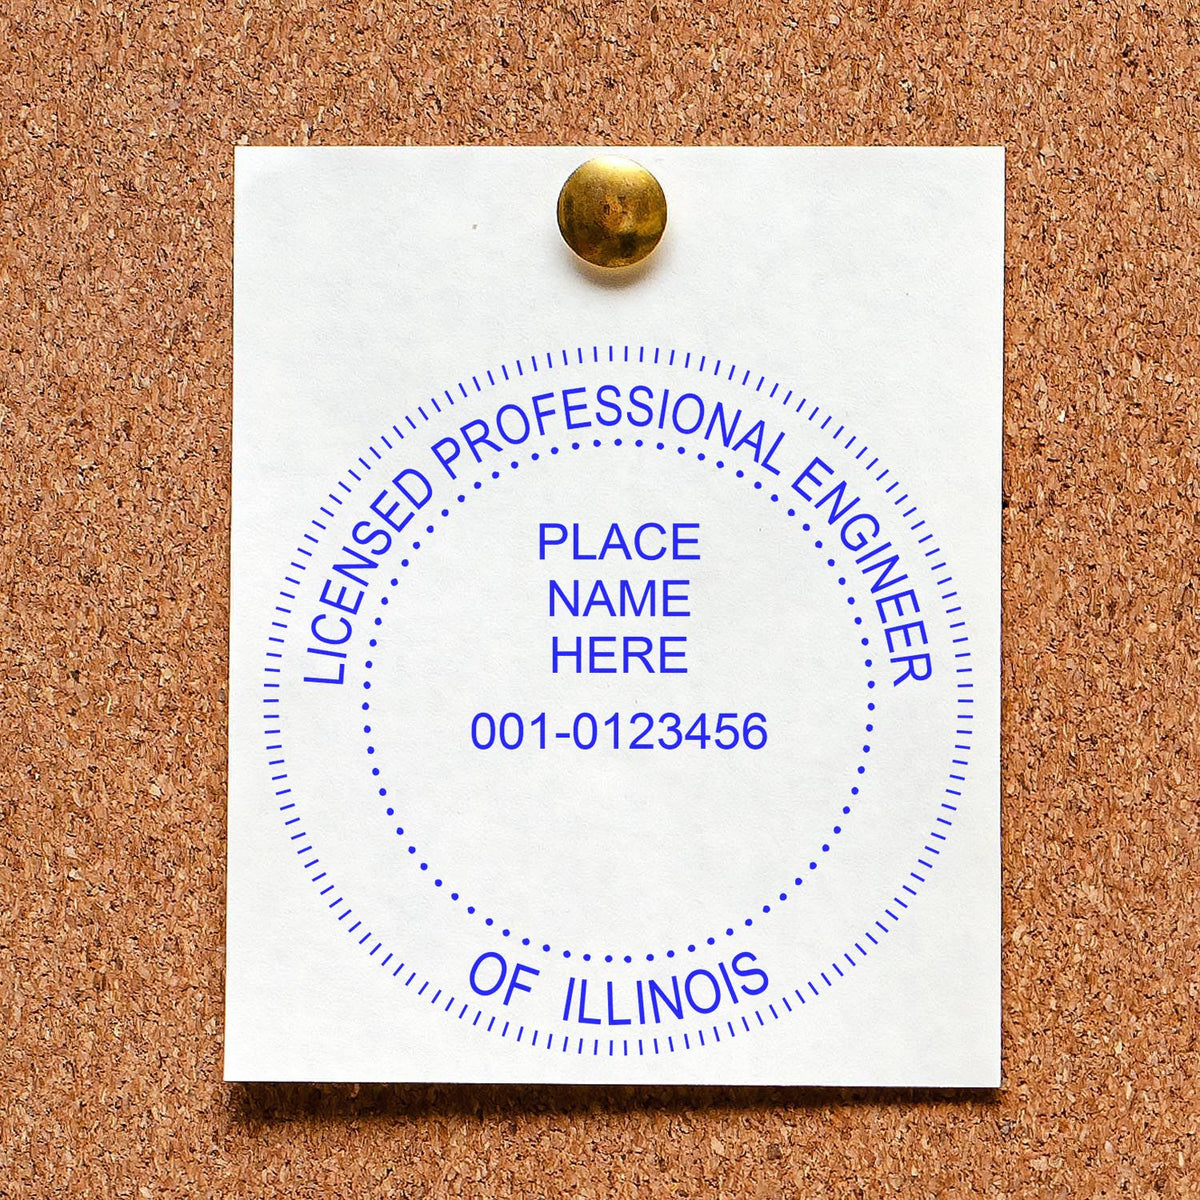 The Slim Pre-Inked Illinois Professional Engineer Seal Stamp stamp impression comes to life with a crisp, detailed photo on paper - showcasing true professional quality.